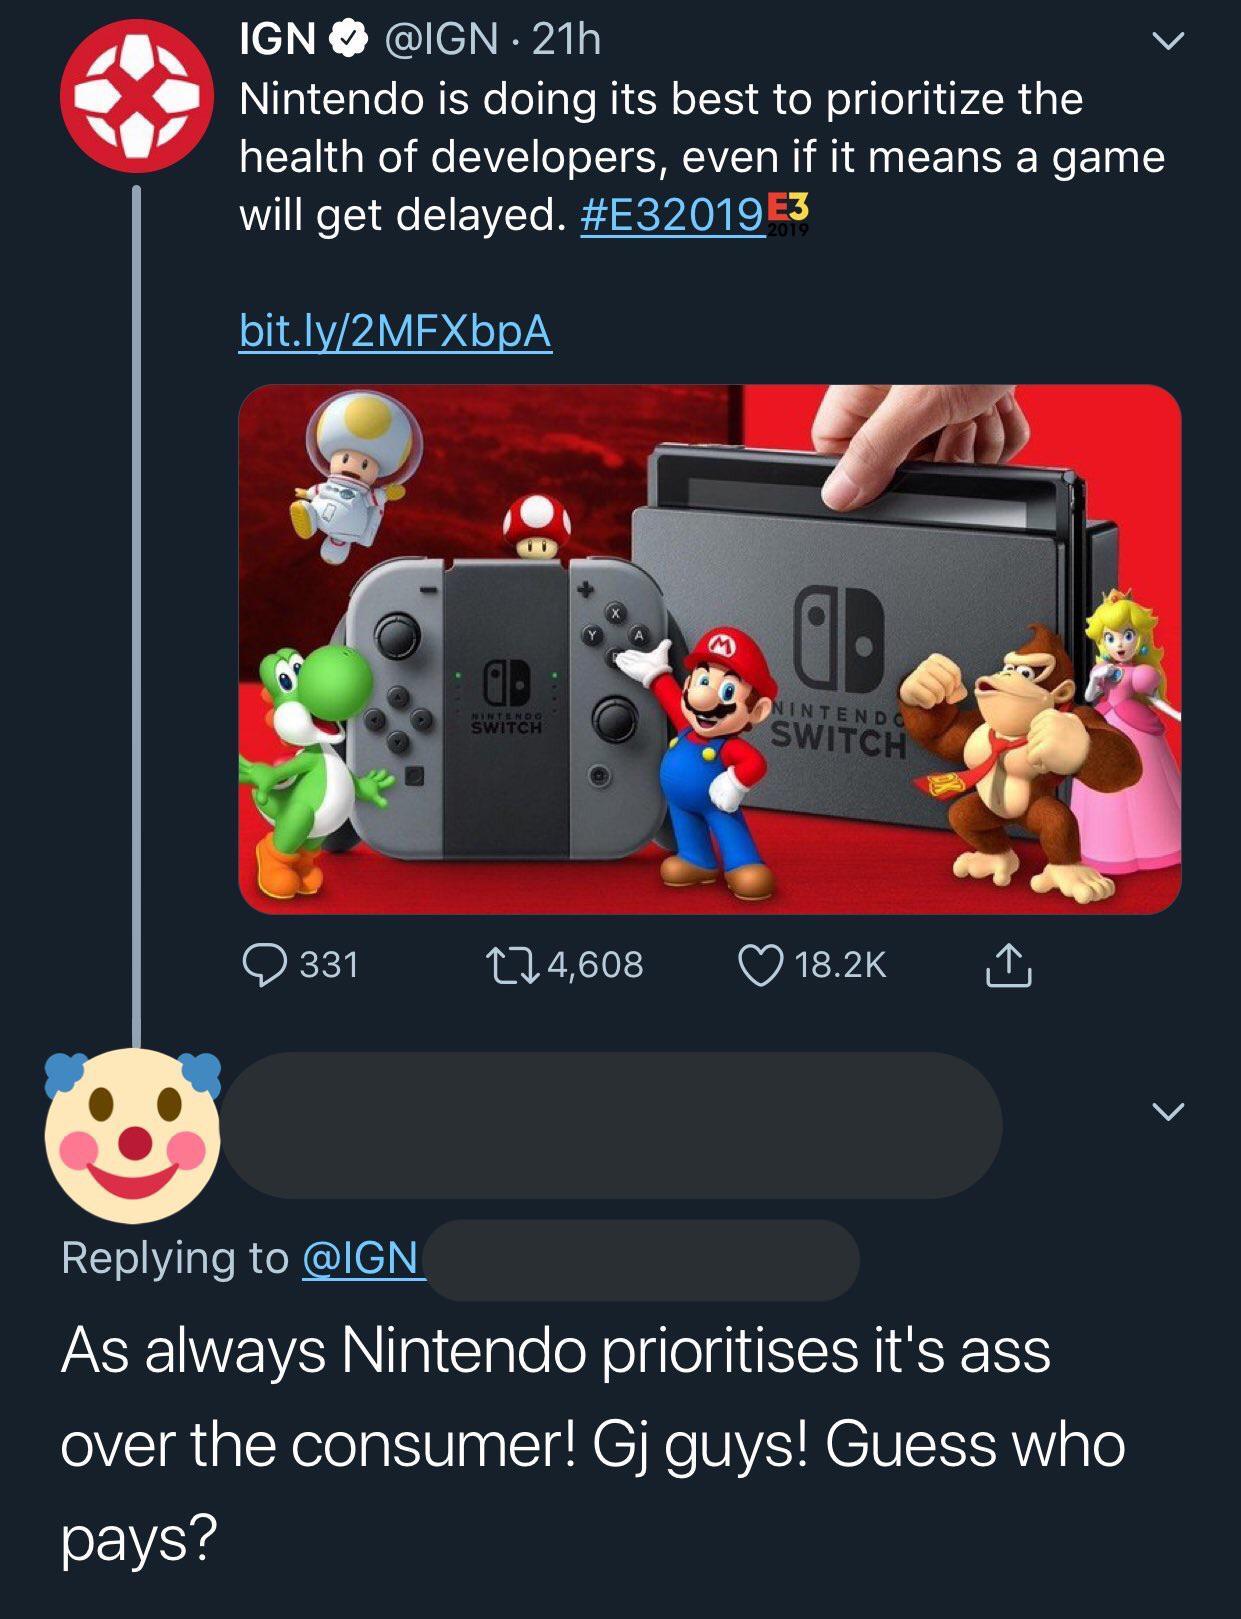 nintendo crunch - Ign 21h Nintendo is doing its best to prioritize the health of developers, even if it means a game will get delayed. E3 bit.ly2MFXbpA M Nintendo Intendo Switch Switch Q331 274,608 As always Nintendo prioritises it's ass over the consumer